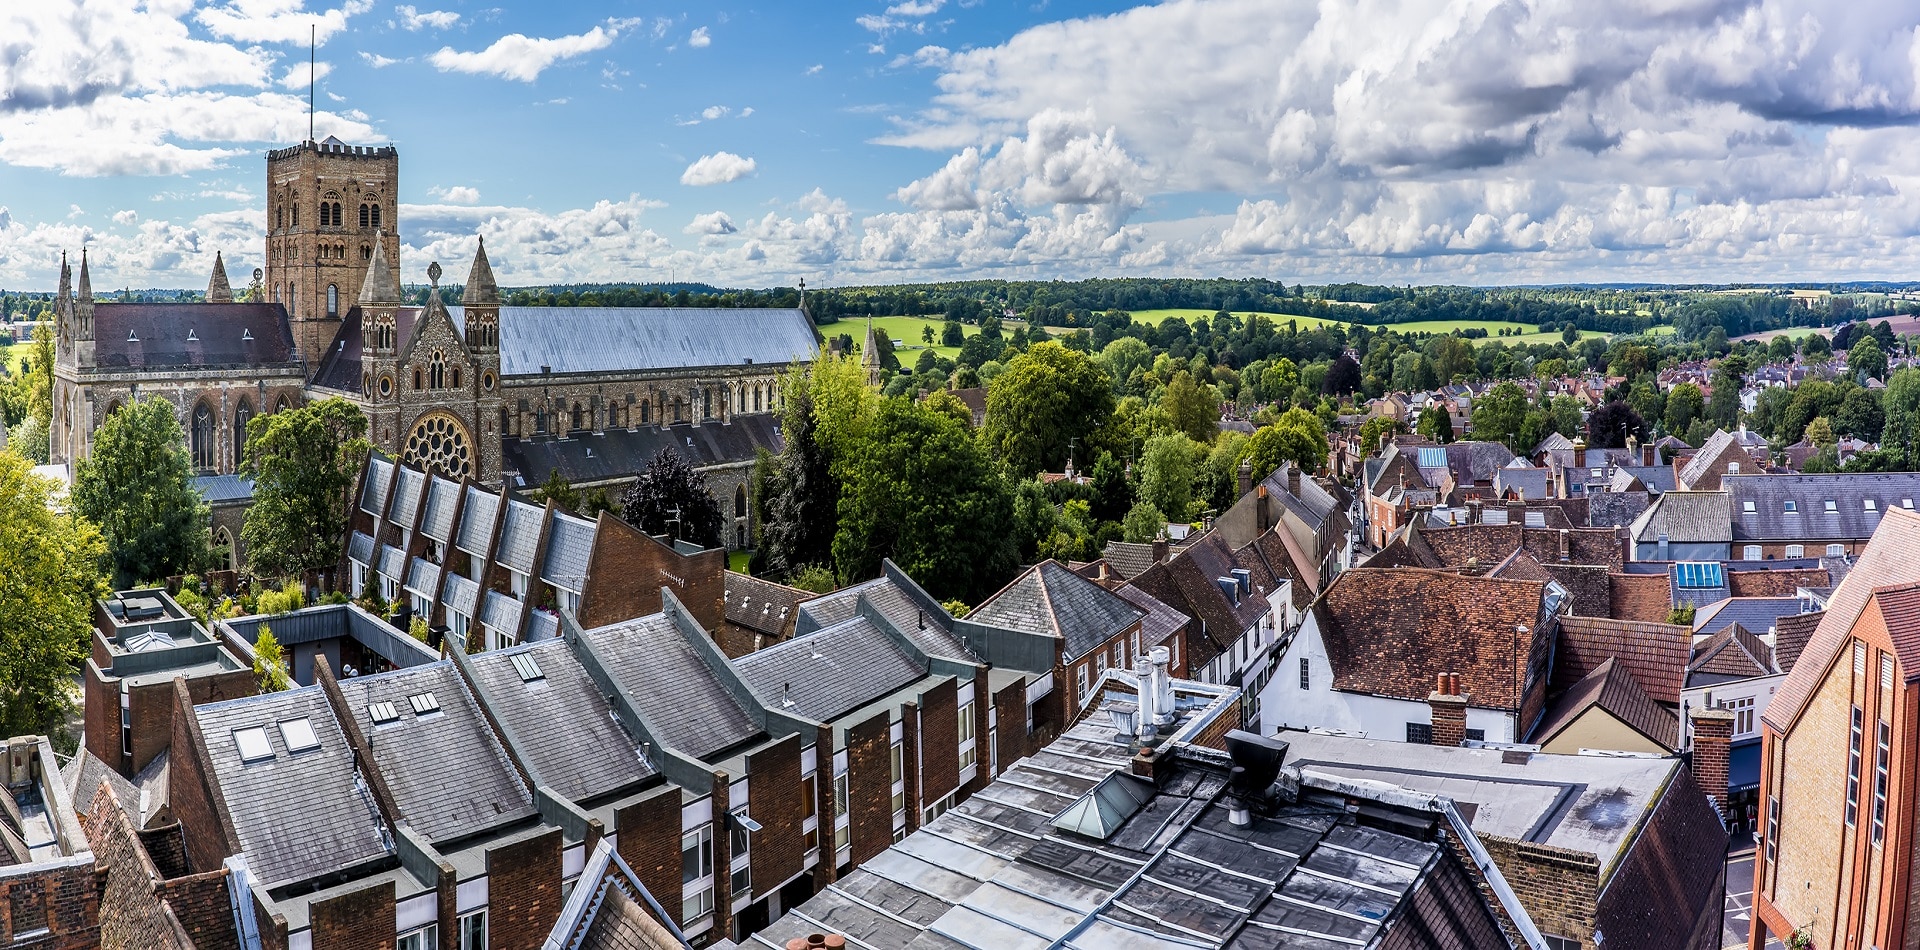 The roof tops of St Albans, UK in summertime